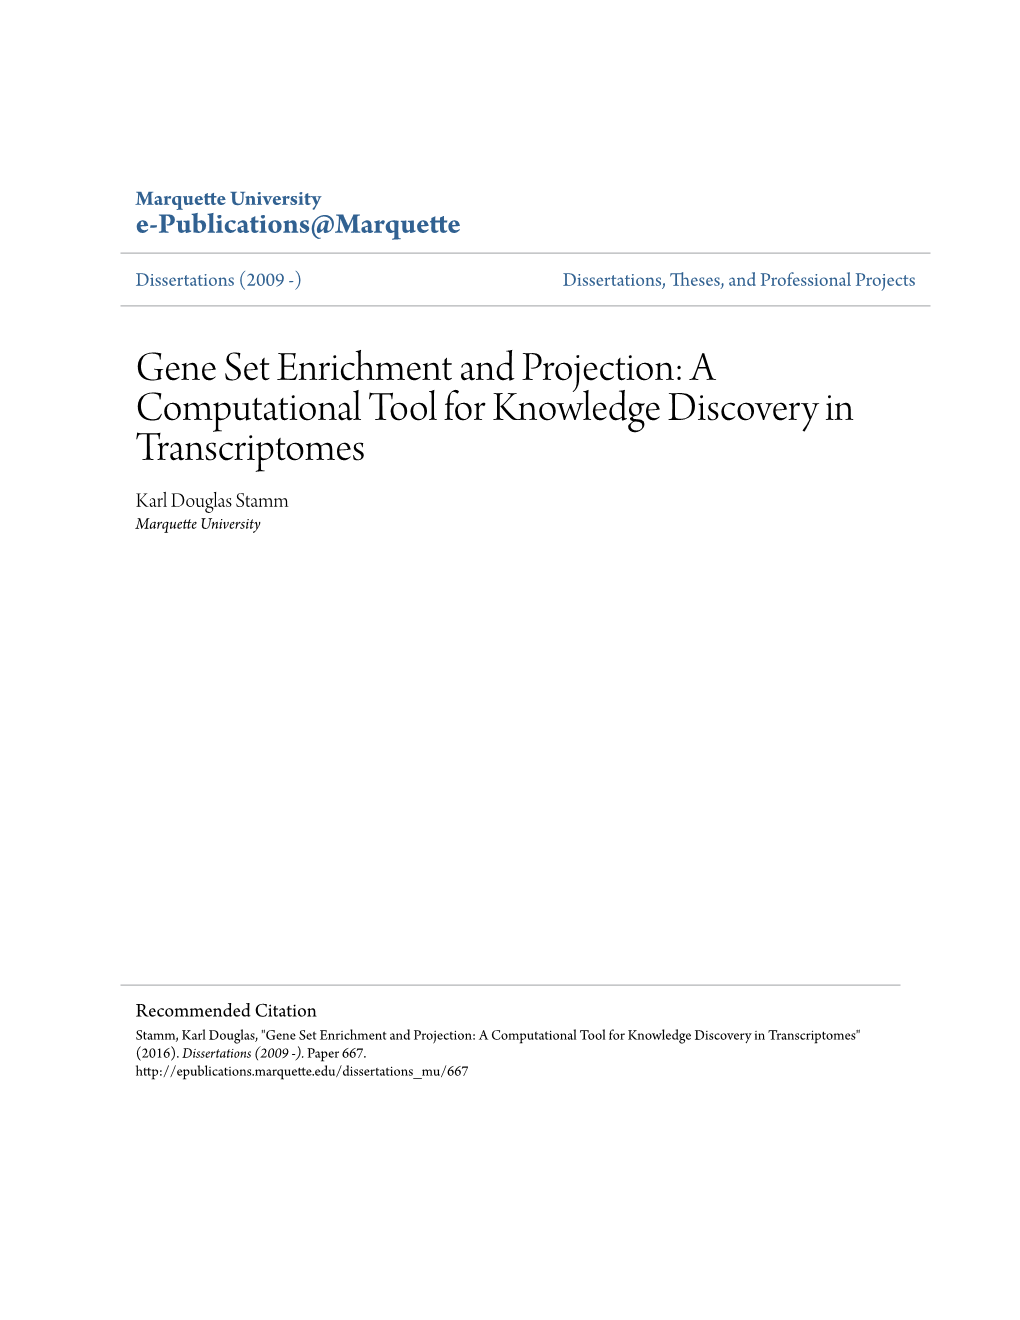 Gene Set Enrichment and Projection: a Computational Tool for Knowledge Discovery in Transcriptomes Karl Douglas Stamm Marquette University